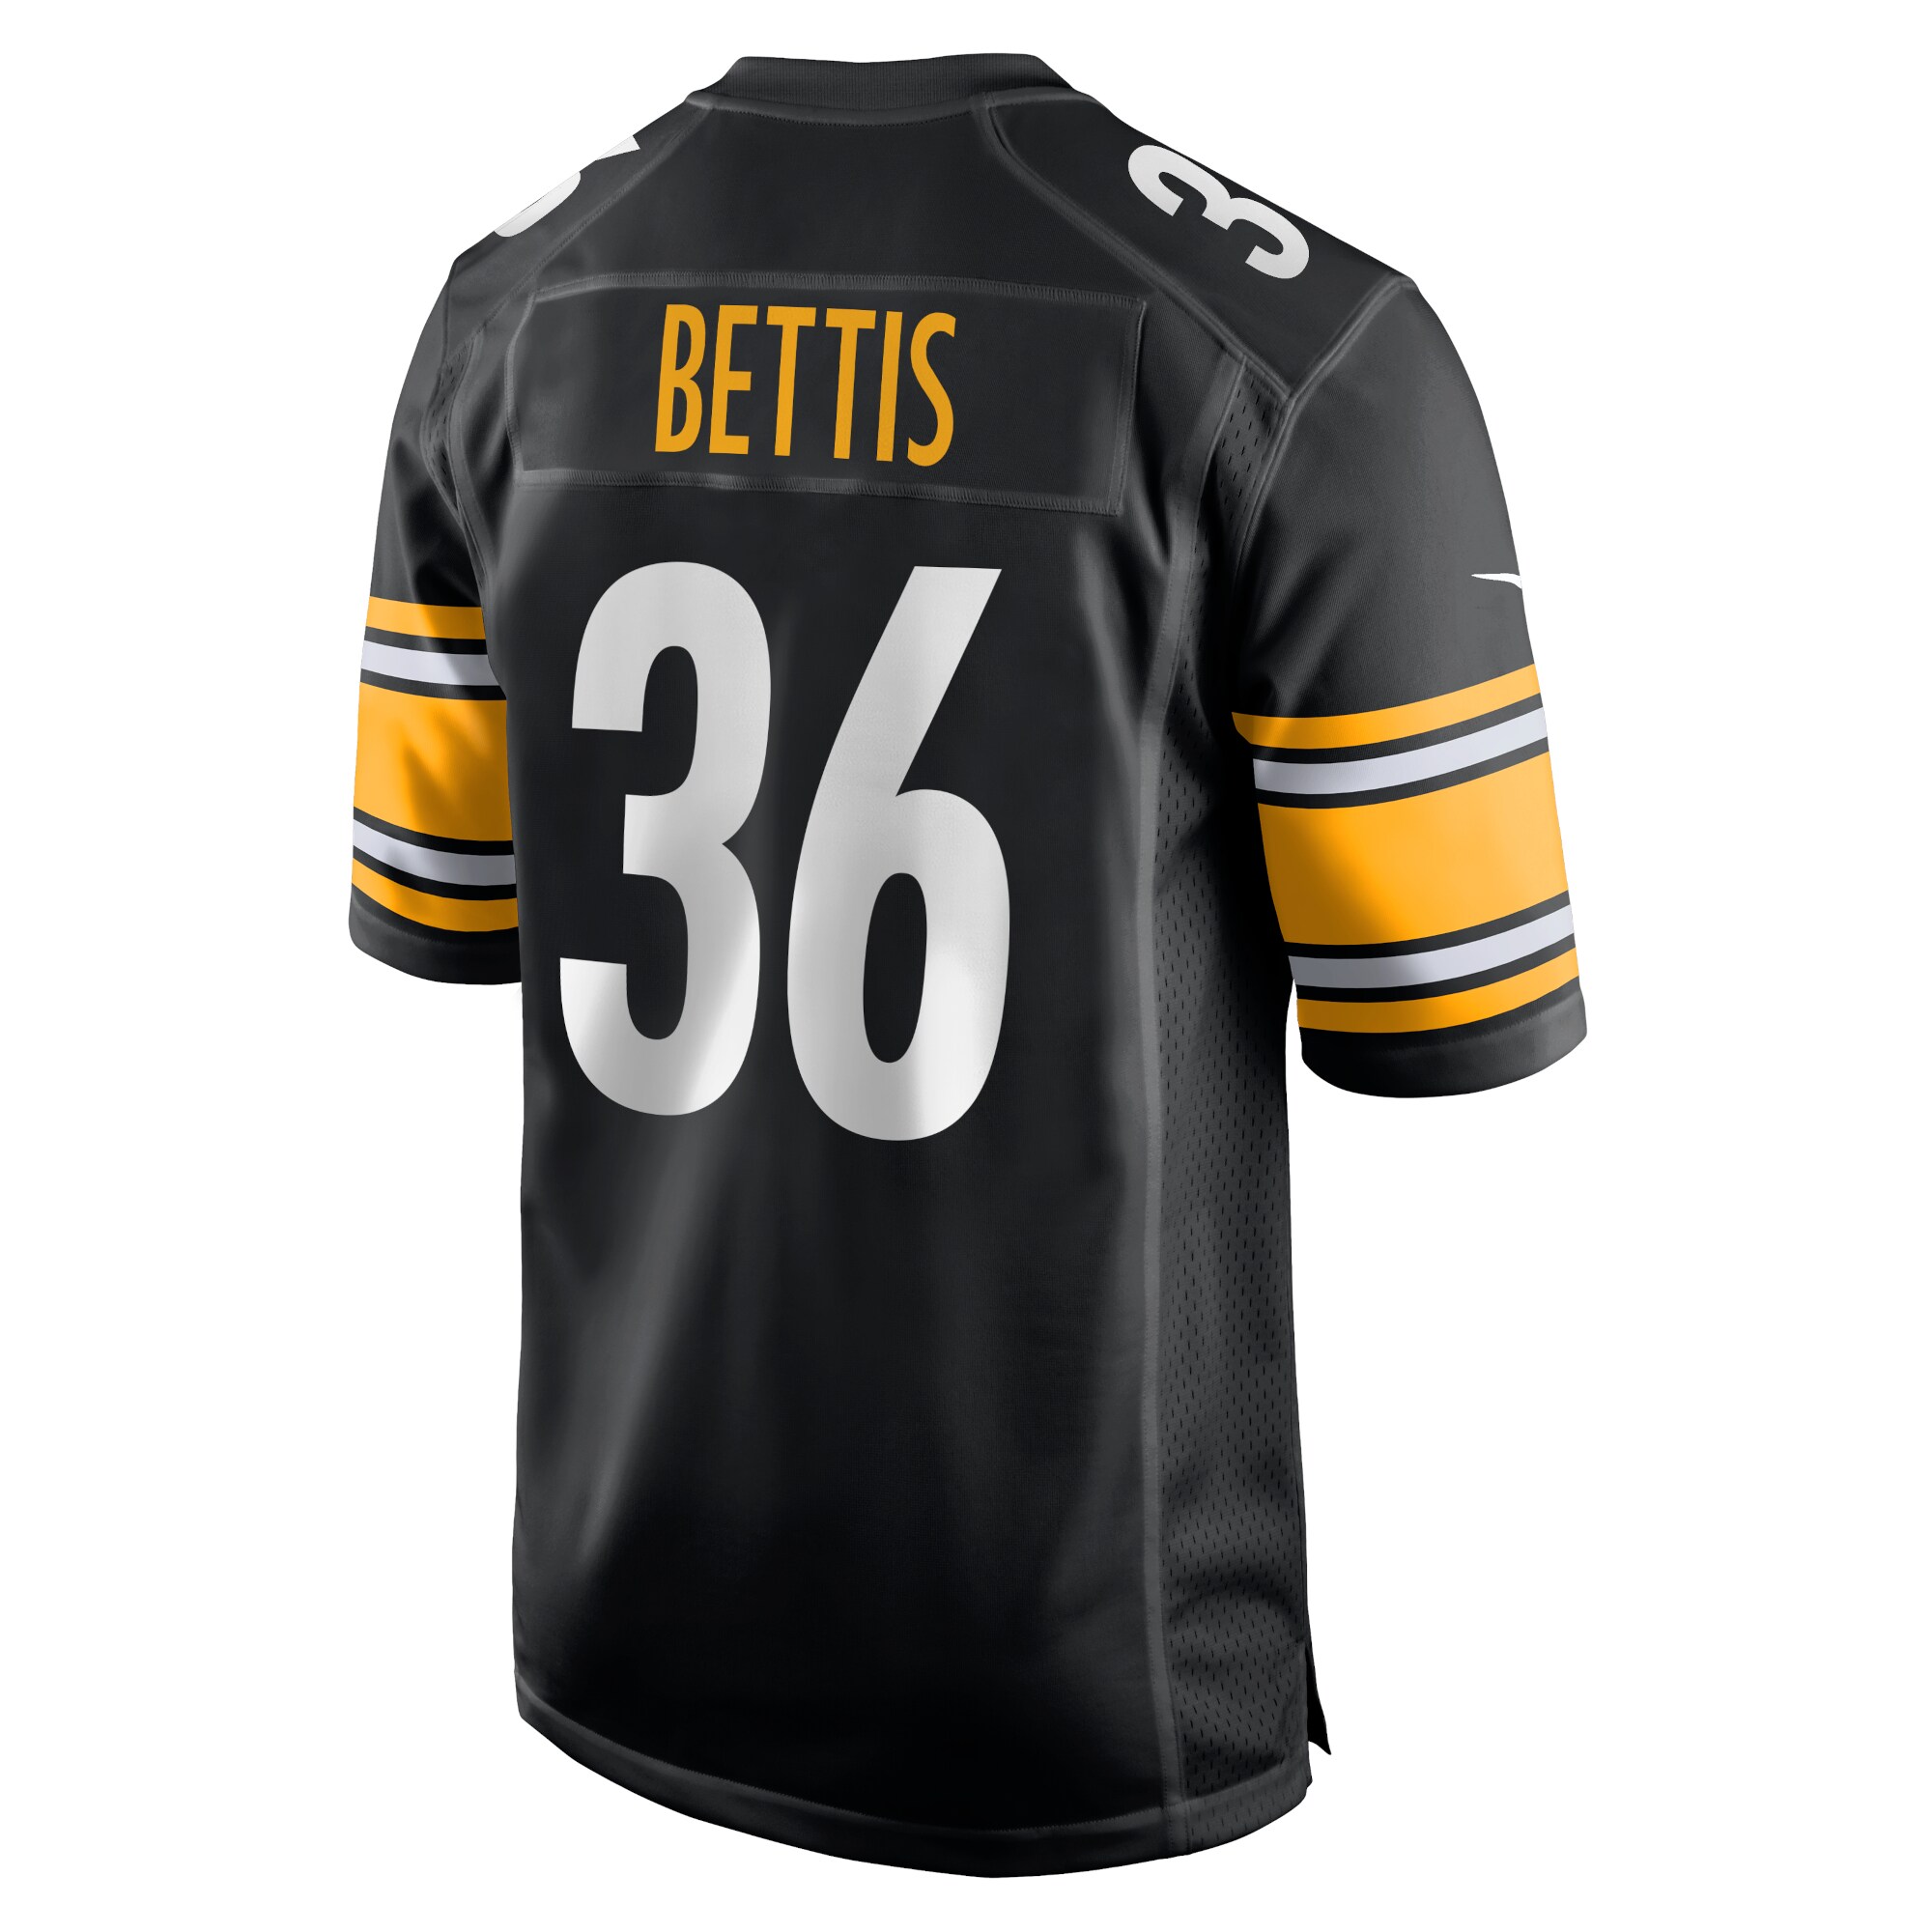 Men's Pittsburgh Steelers Jerseys Black Jerome Bettis Retired Player Game Style